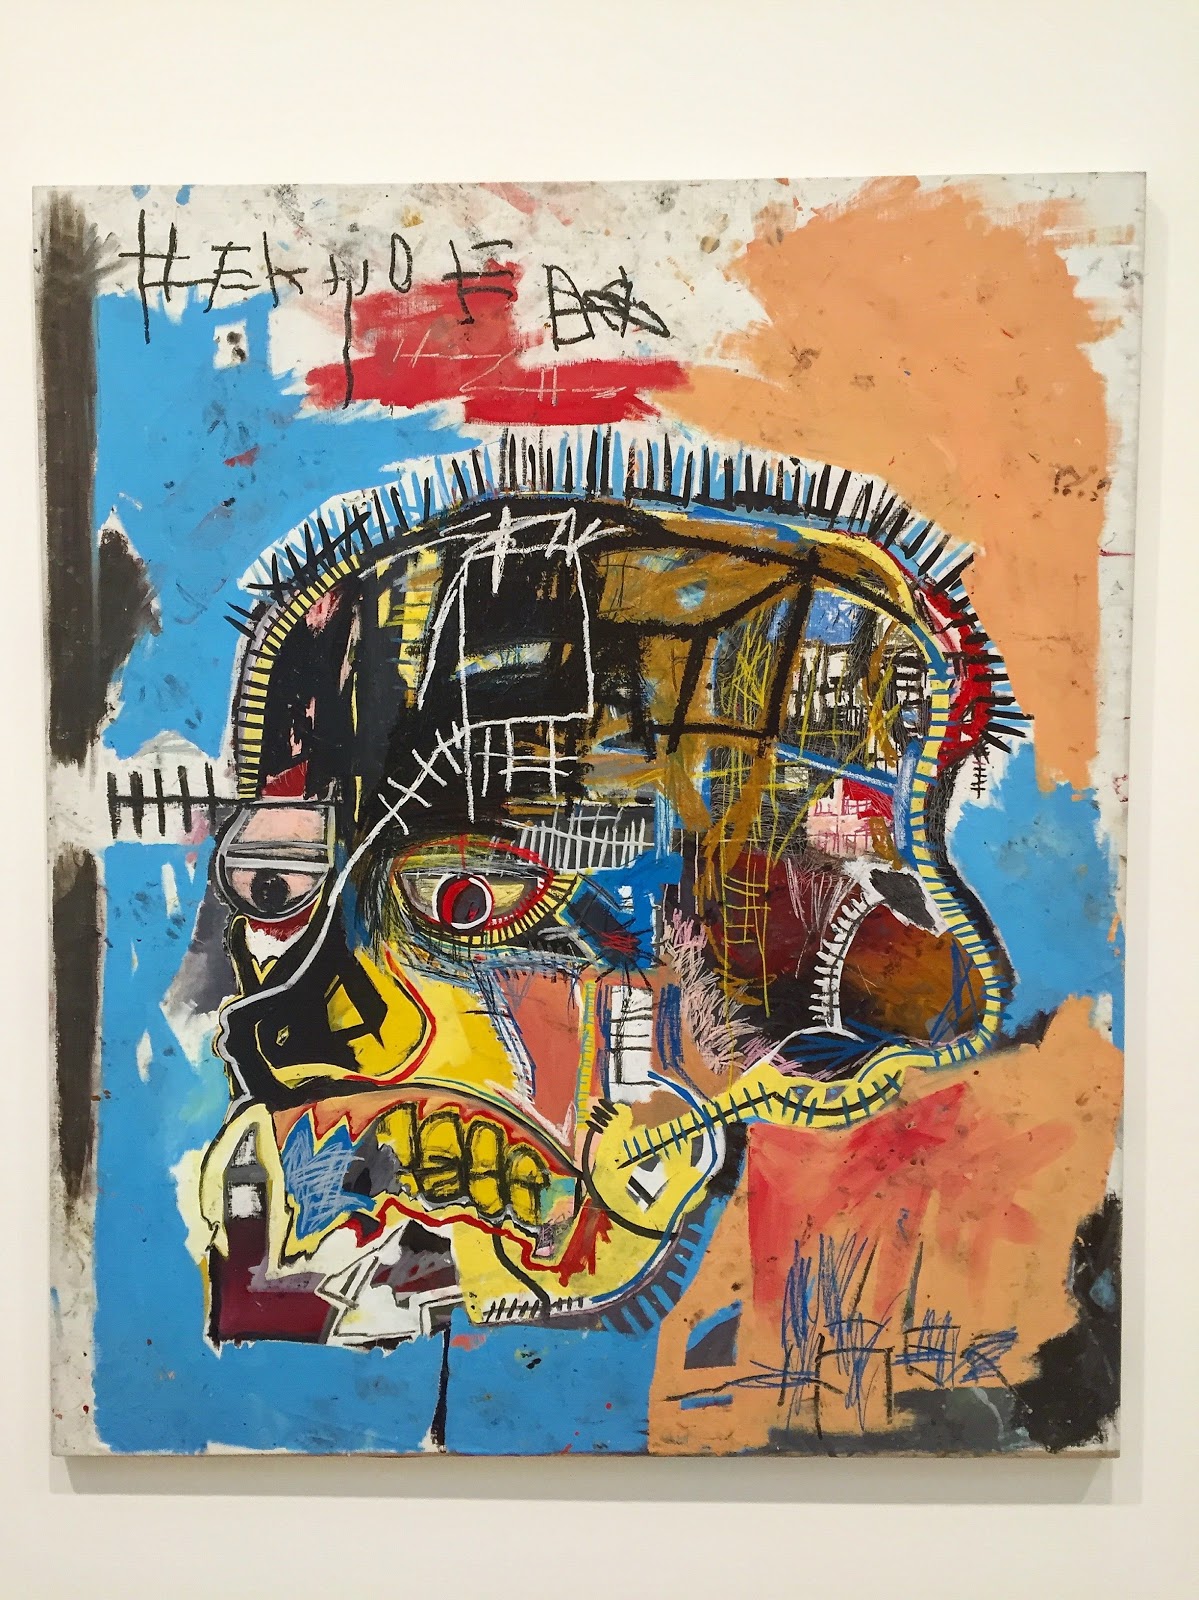 Untitled, 1981 by Jean-Michel Basquiat. An abstract representation of a face (side-view)